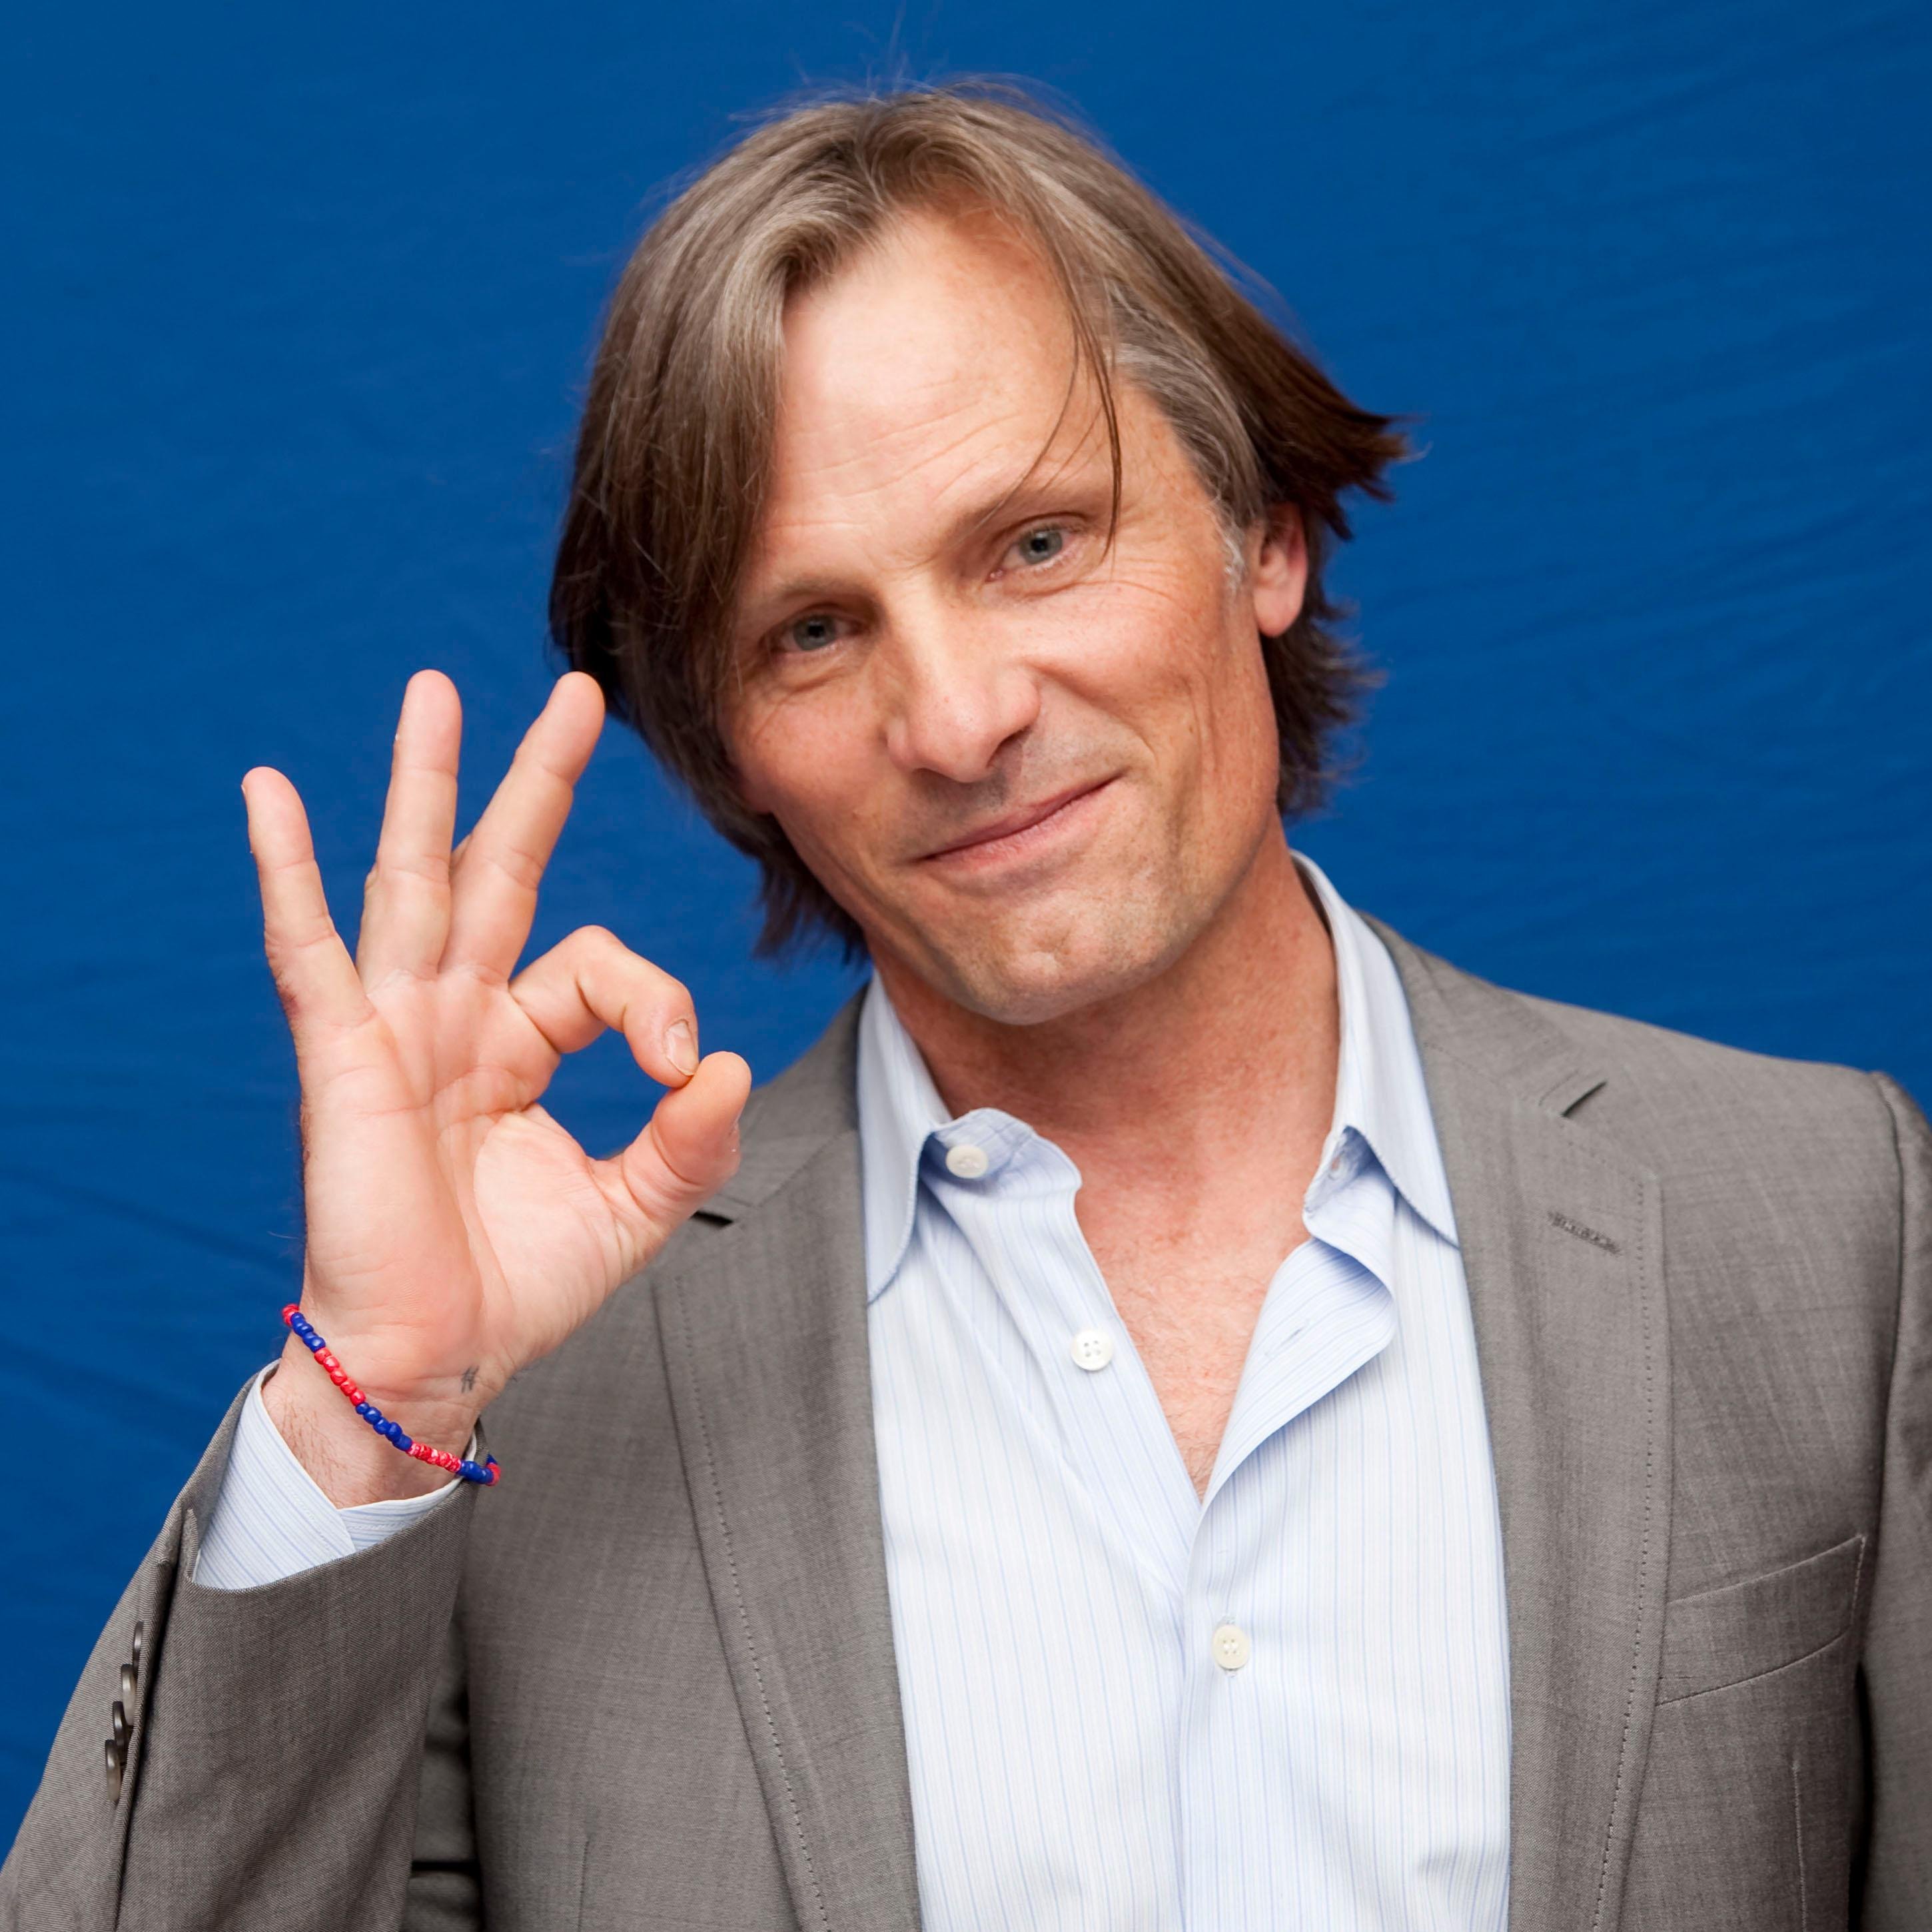 my main interest is Viggo Mortensen, i also like to go out walking with my husband and our dog, and going dancing, reading.